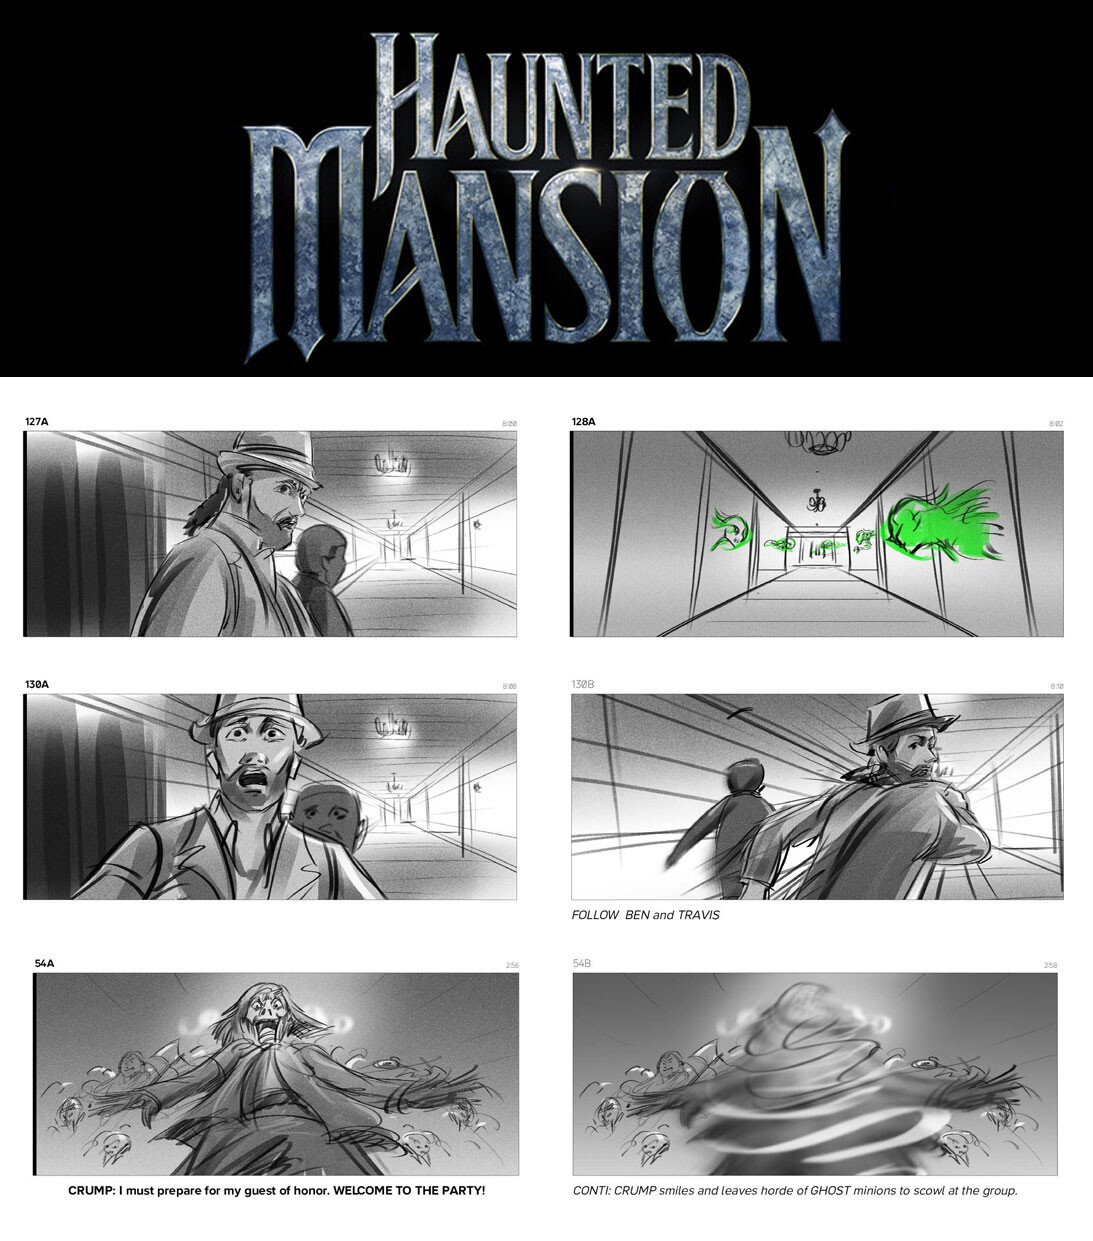 HAUNTED MANSION MAZE SEQUENCE